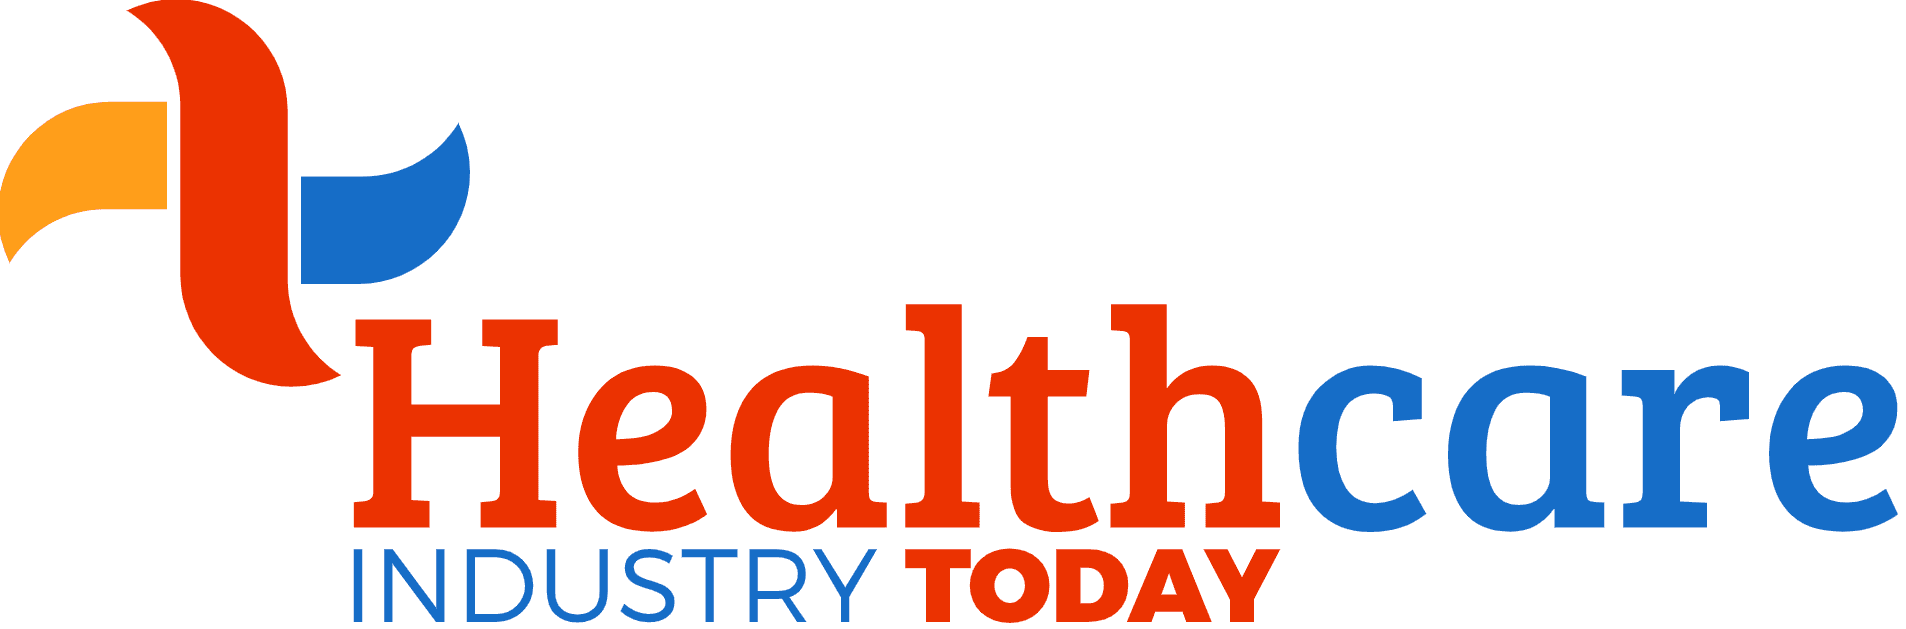 ViaDerma Featured in Healthcare Industry Today